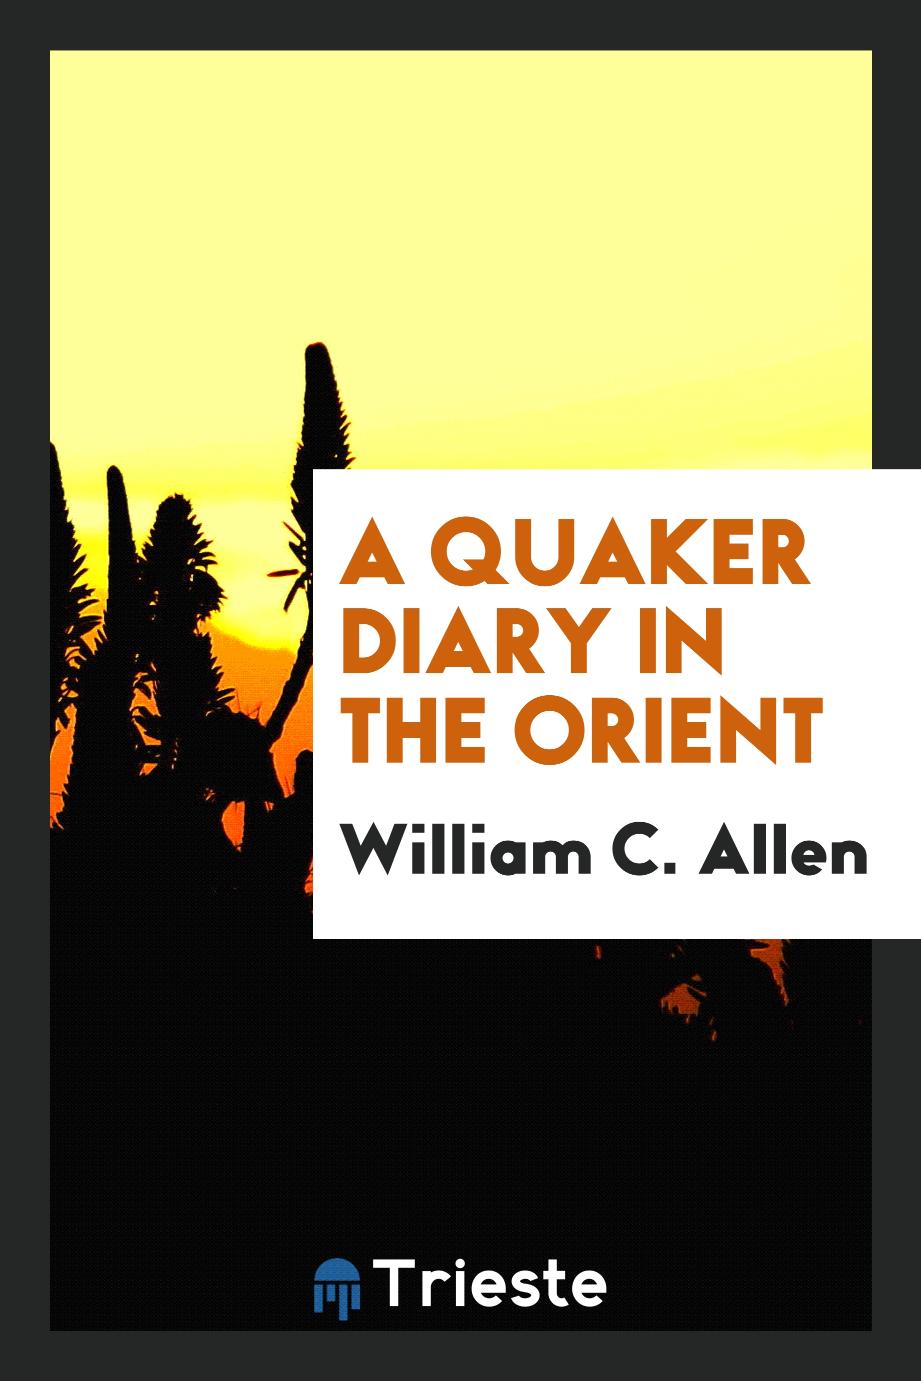 A Quaker Diary in the Orient